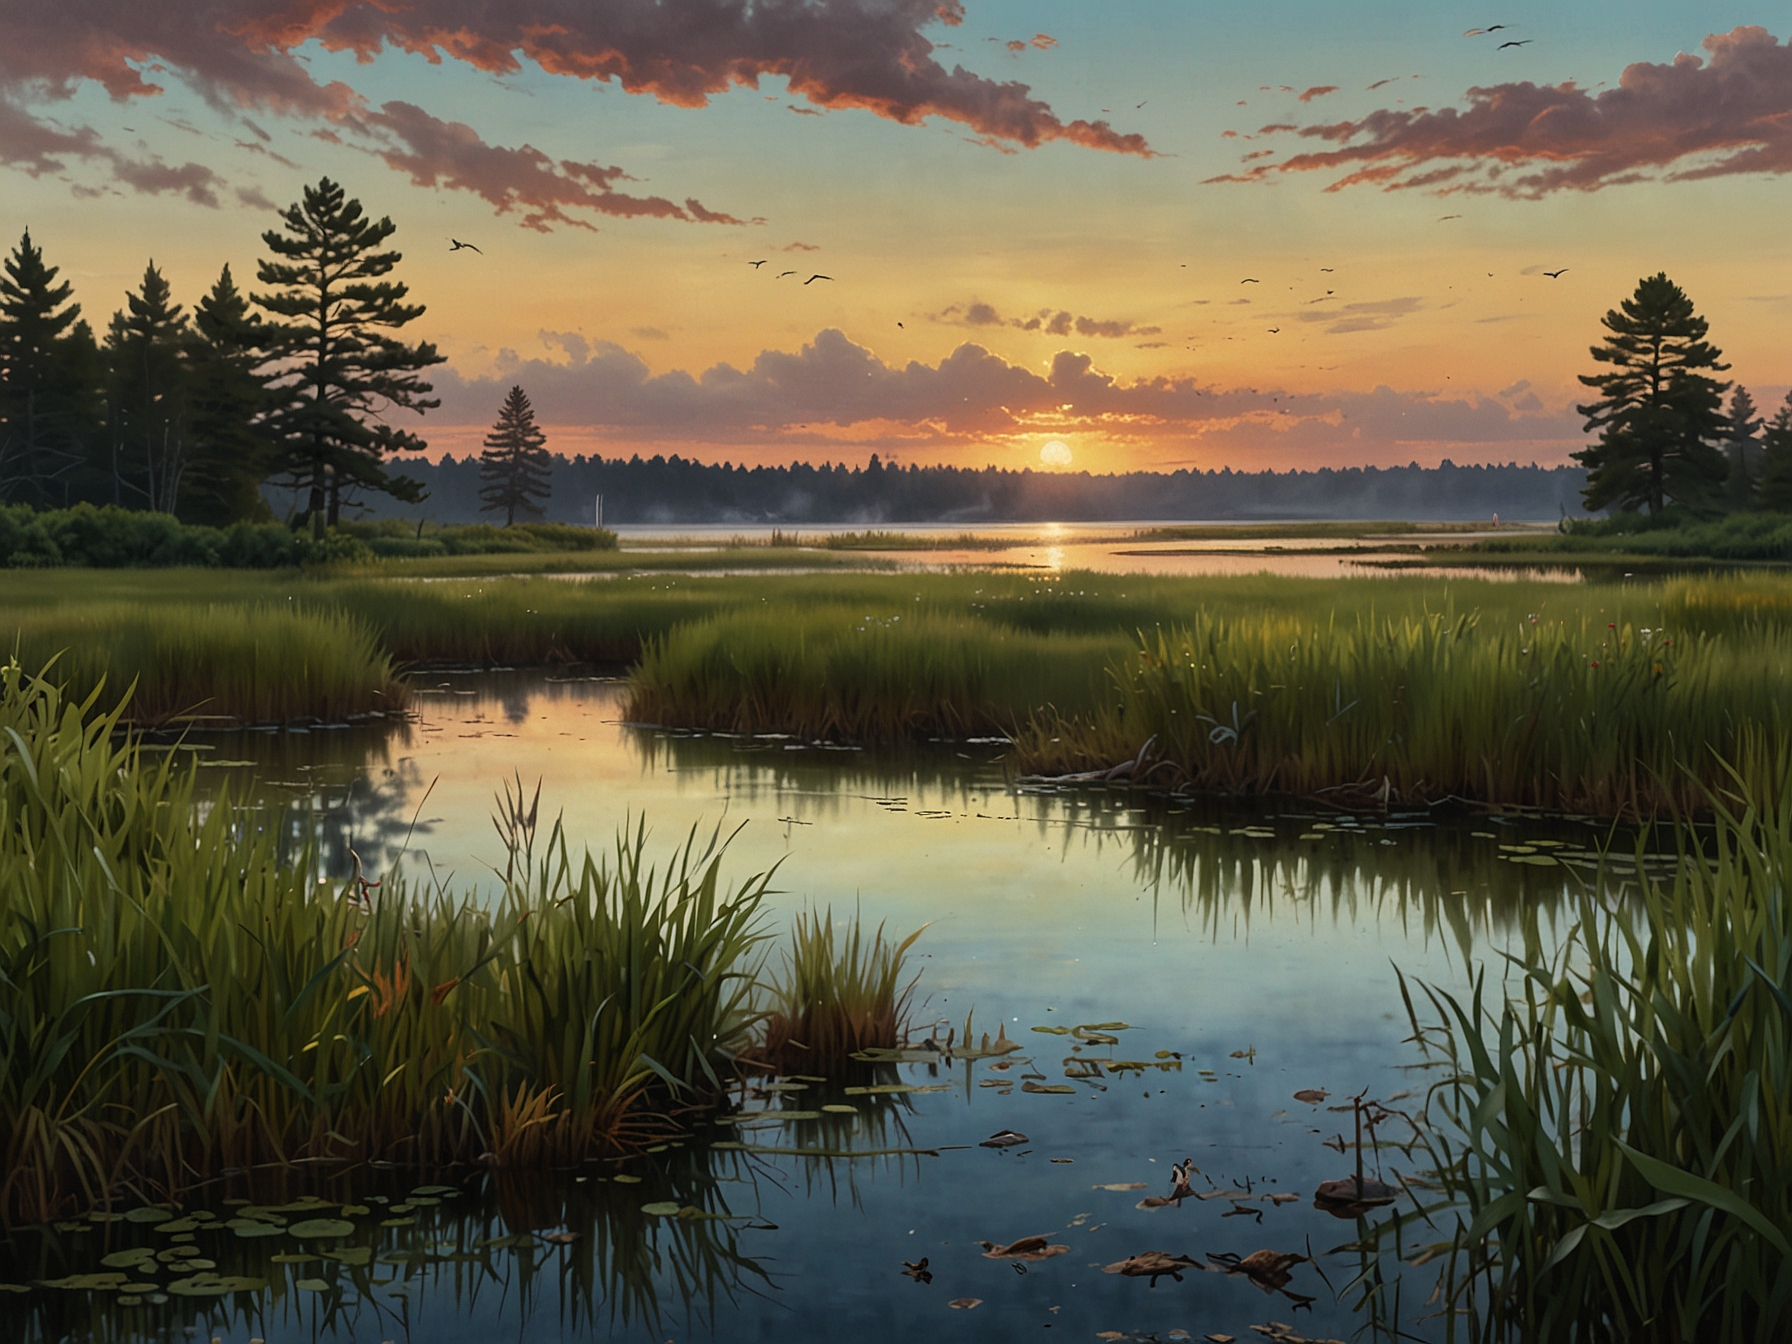 A serene depiction of Maine’s marshlands, capturing the essence of Parker’s 'Marshpunk', with frogs, cattails, and herons intricately rendered to showcase the poems' vibrant imagery.